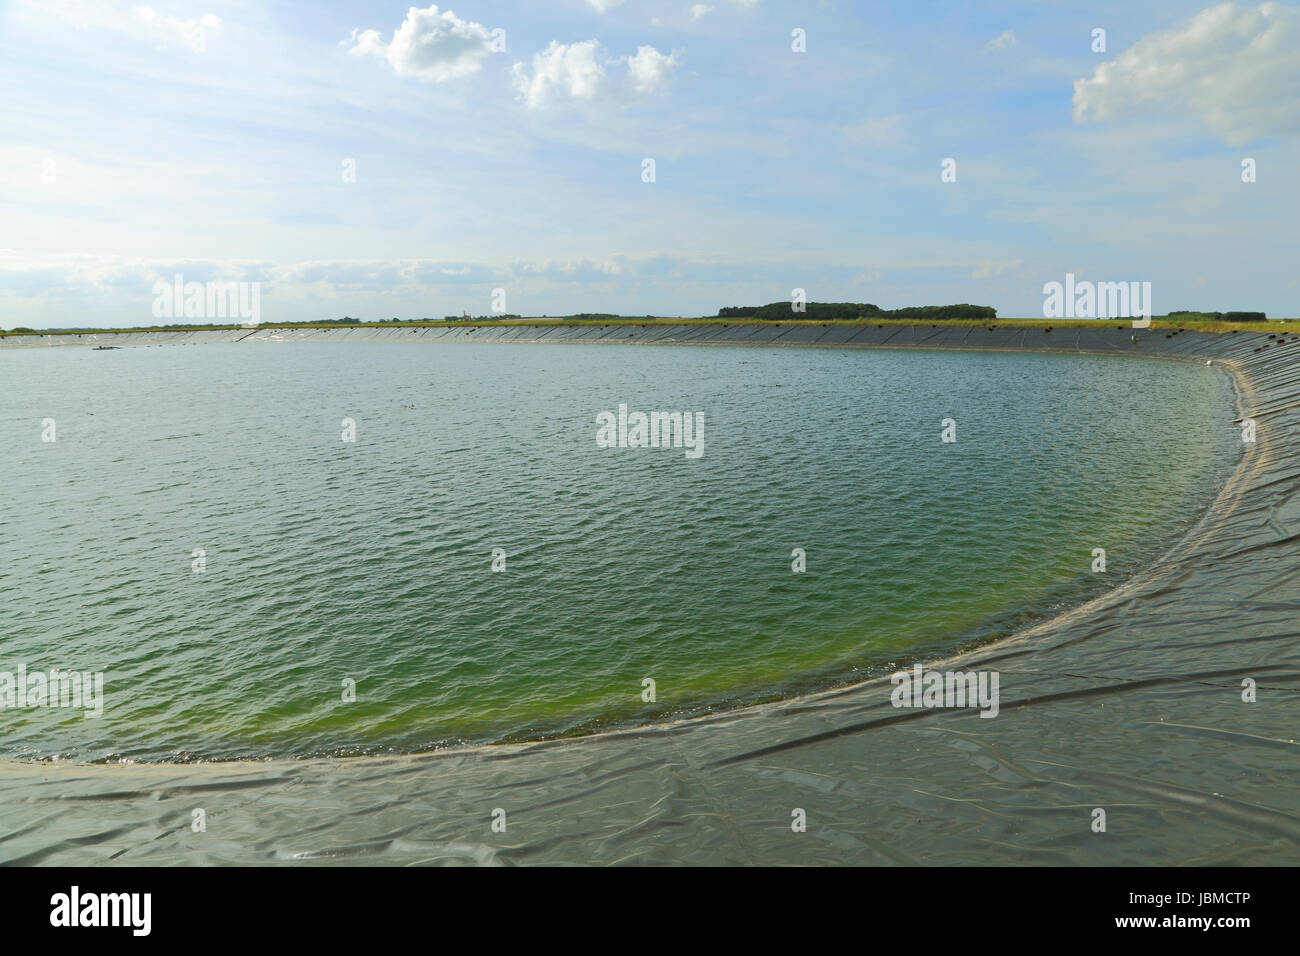 agricultural reservoir, man made, water supply for agriculture, Norfolk, England, UK, crop irrigation reservoirs Stock Photo